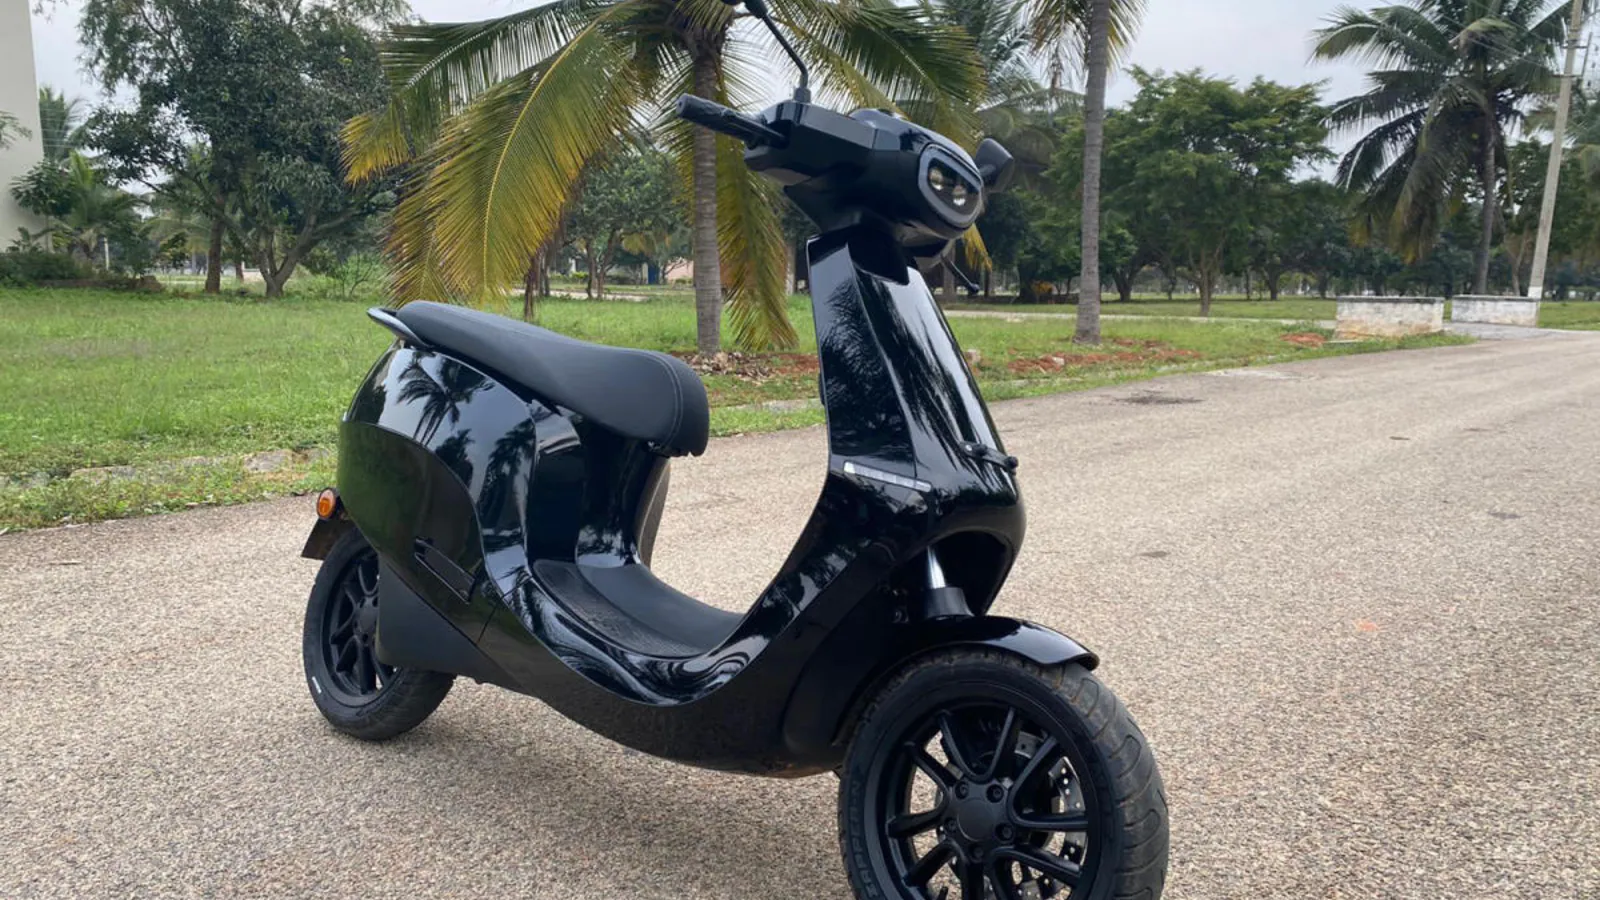 Ola Electric CMO Claims Scooters Dispatched on Time, Clarifies Vahan ‘Discrepancy’